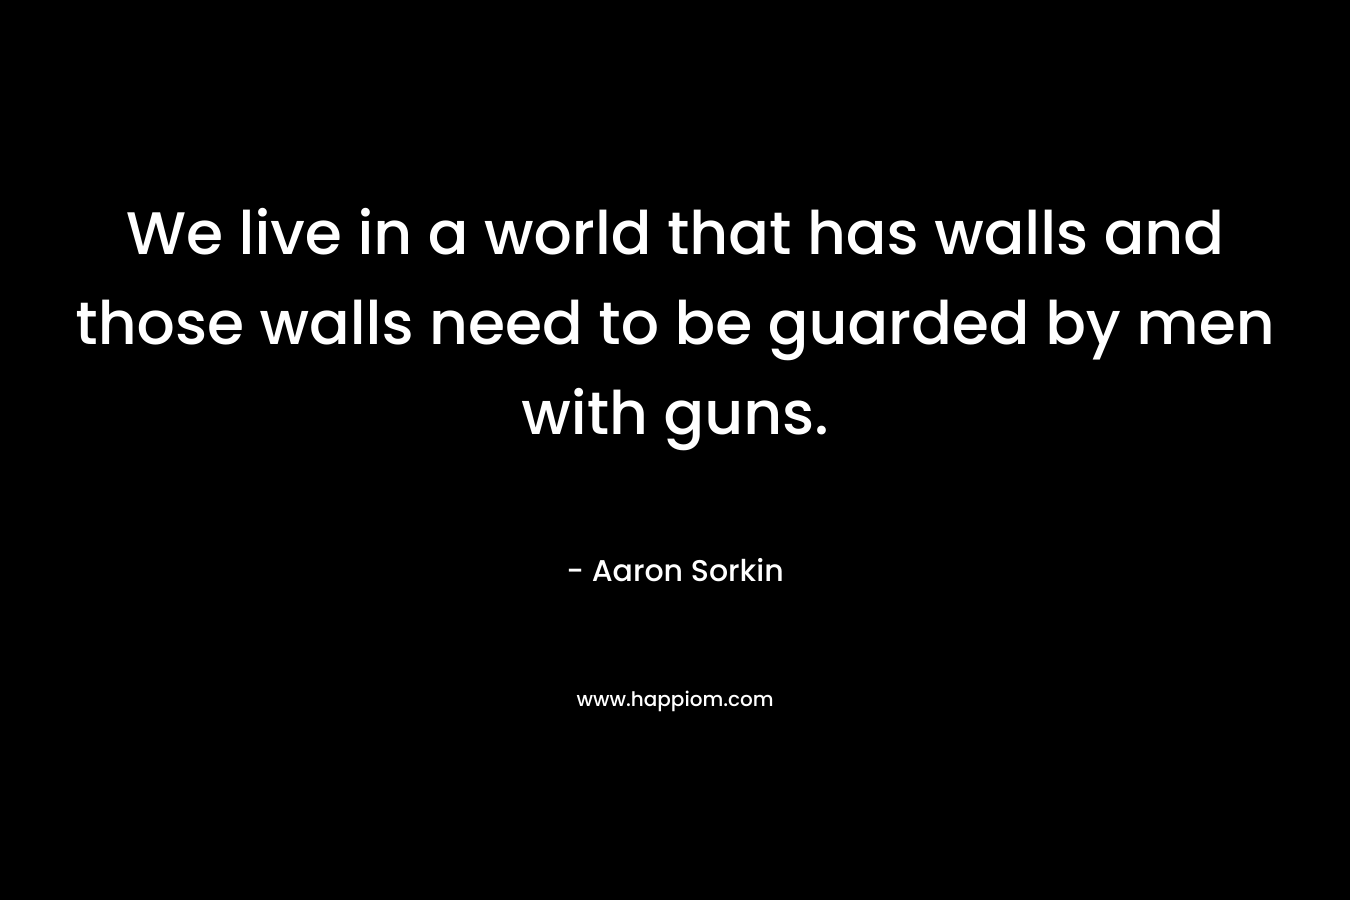 We live in a world that has walls and those walls need to be guarded by men with guns.